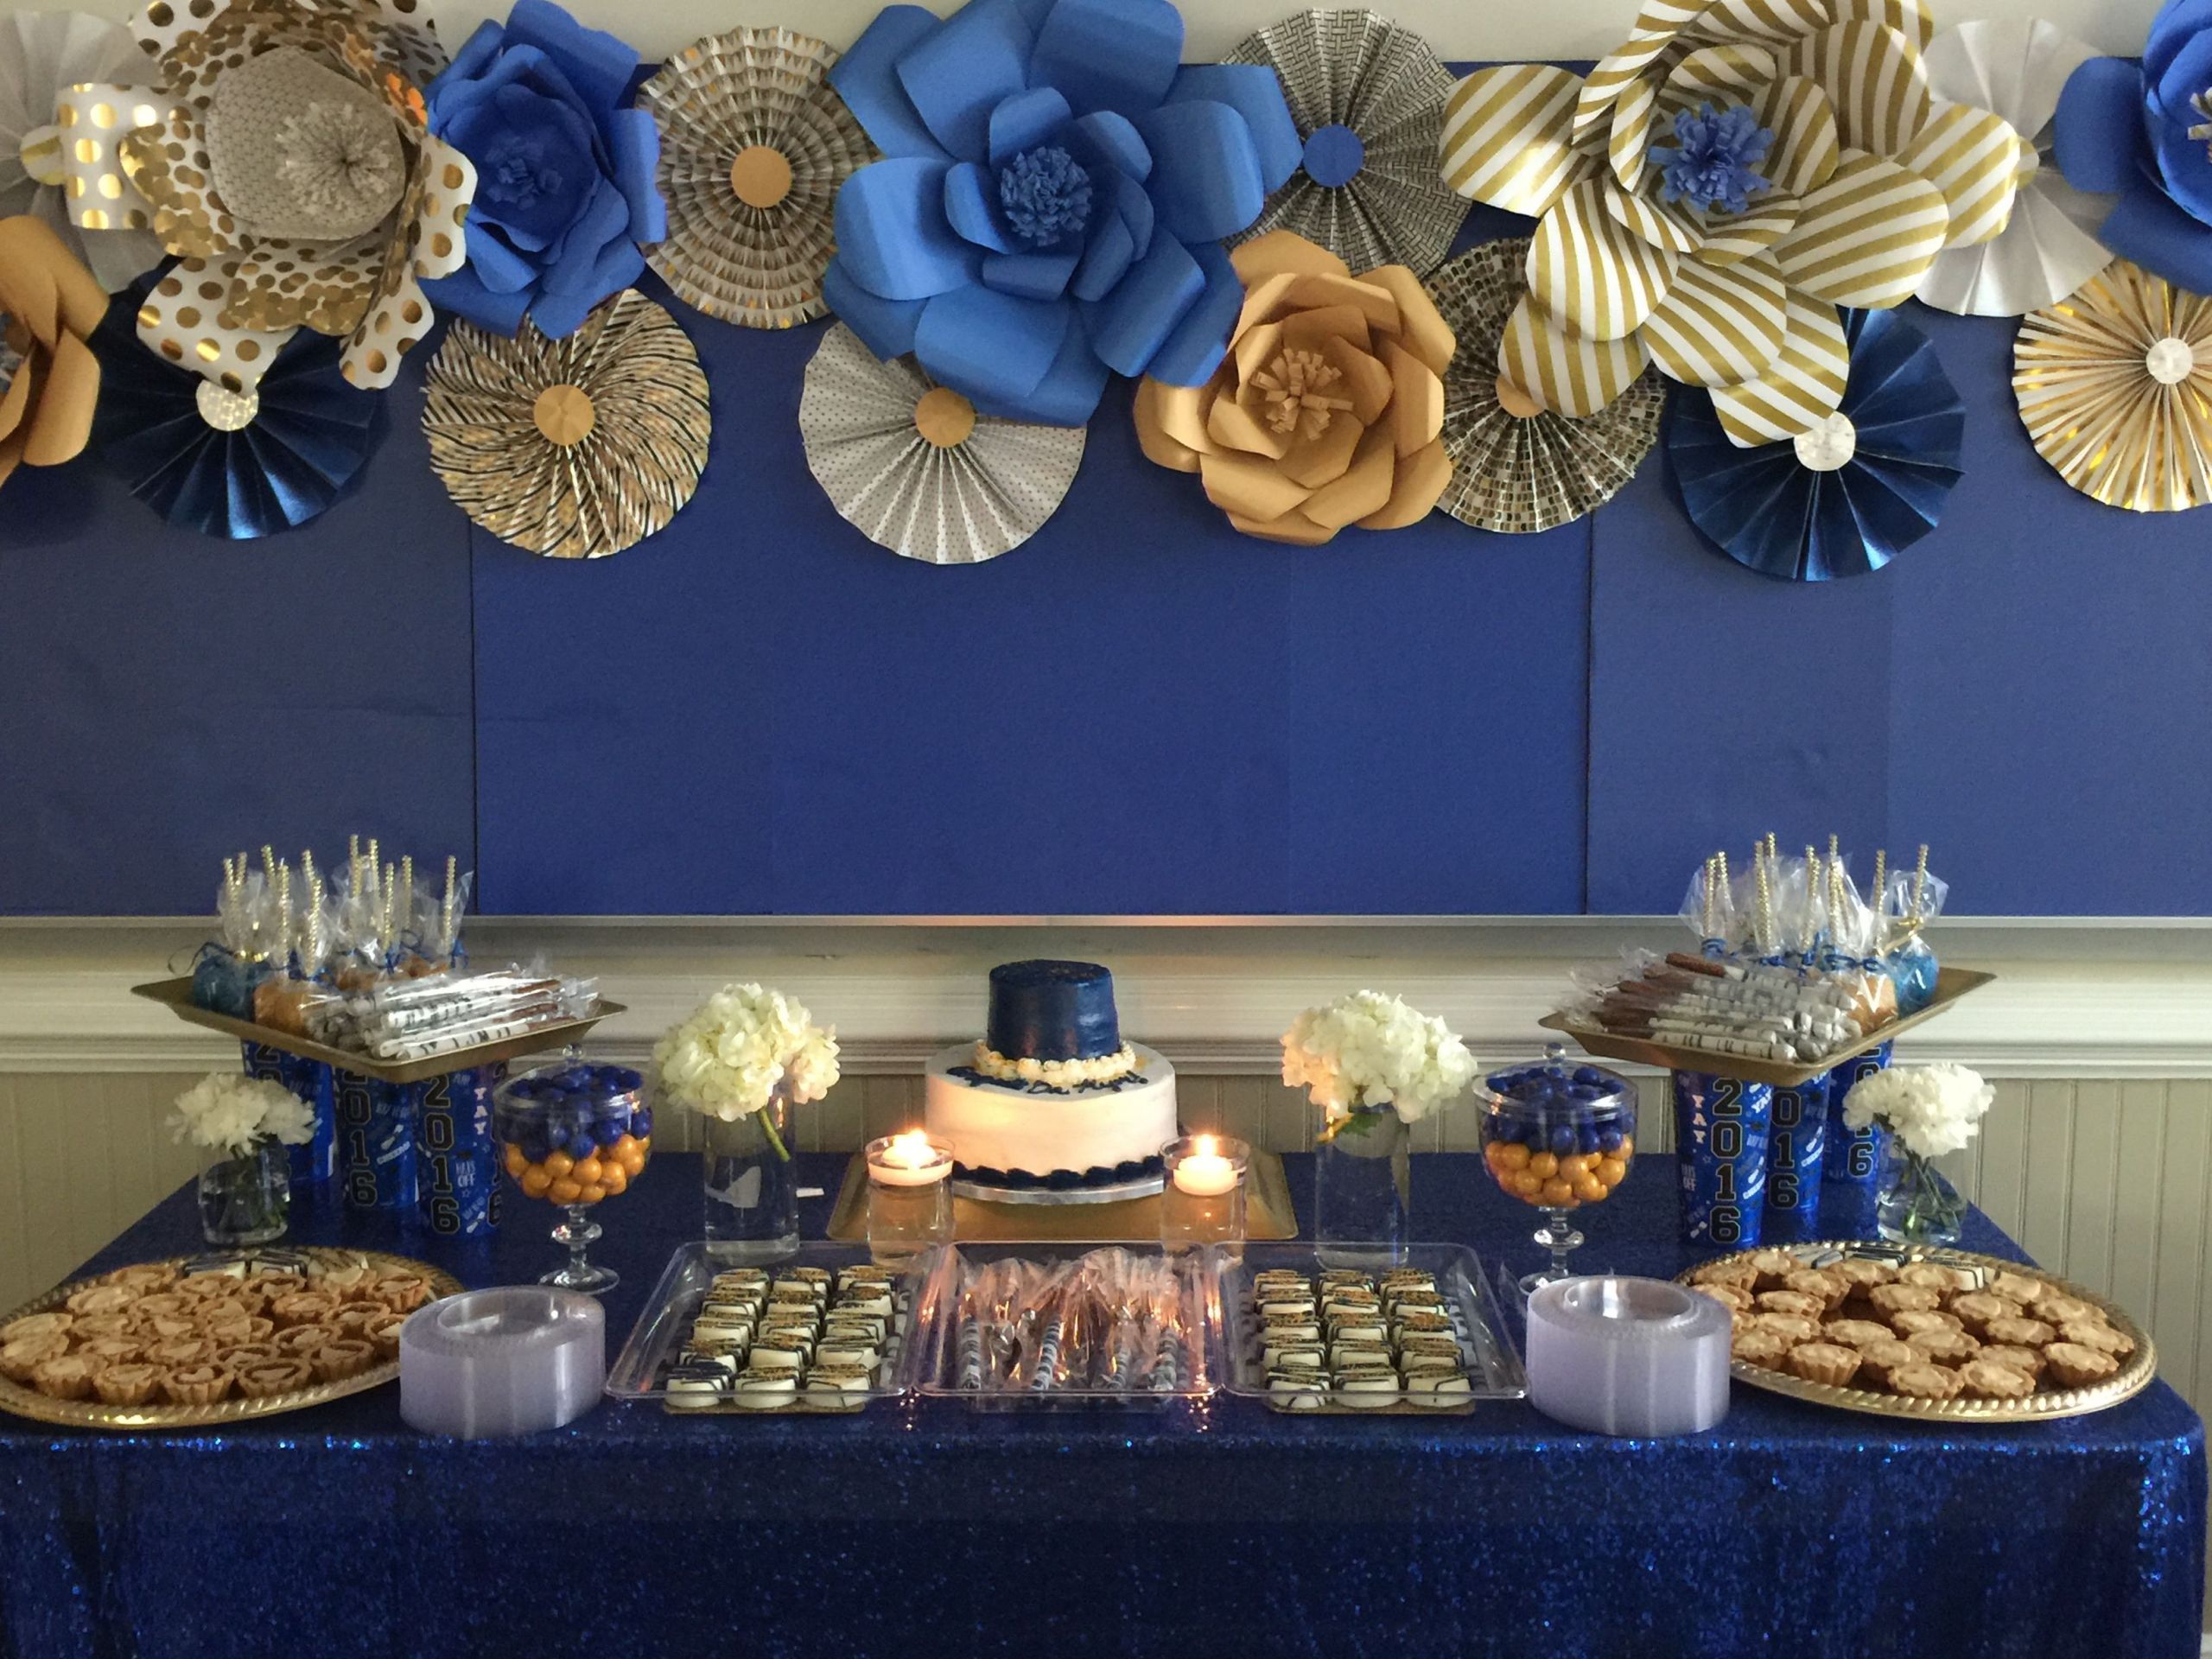 Blue And Gold Graduation Party Ideas
 Royal blue and gold dessert table with paper flowers and